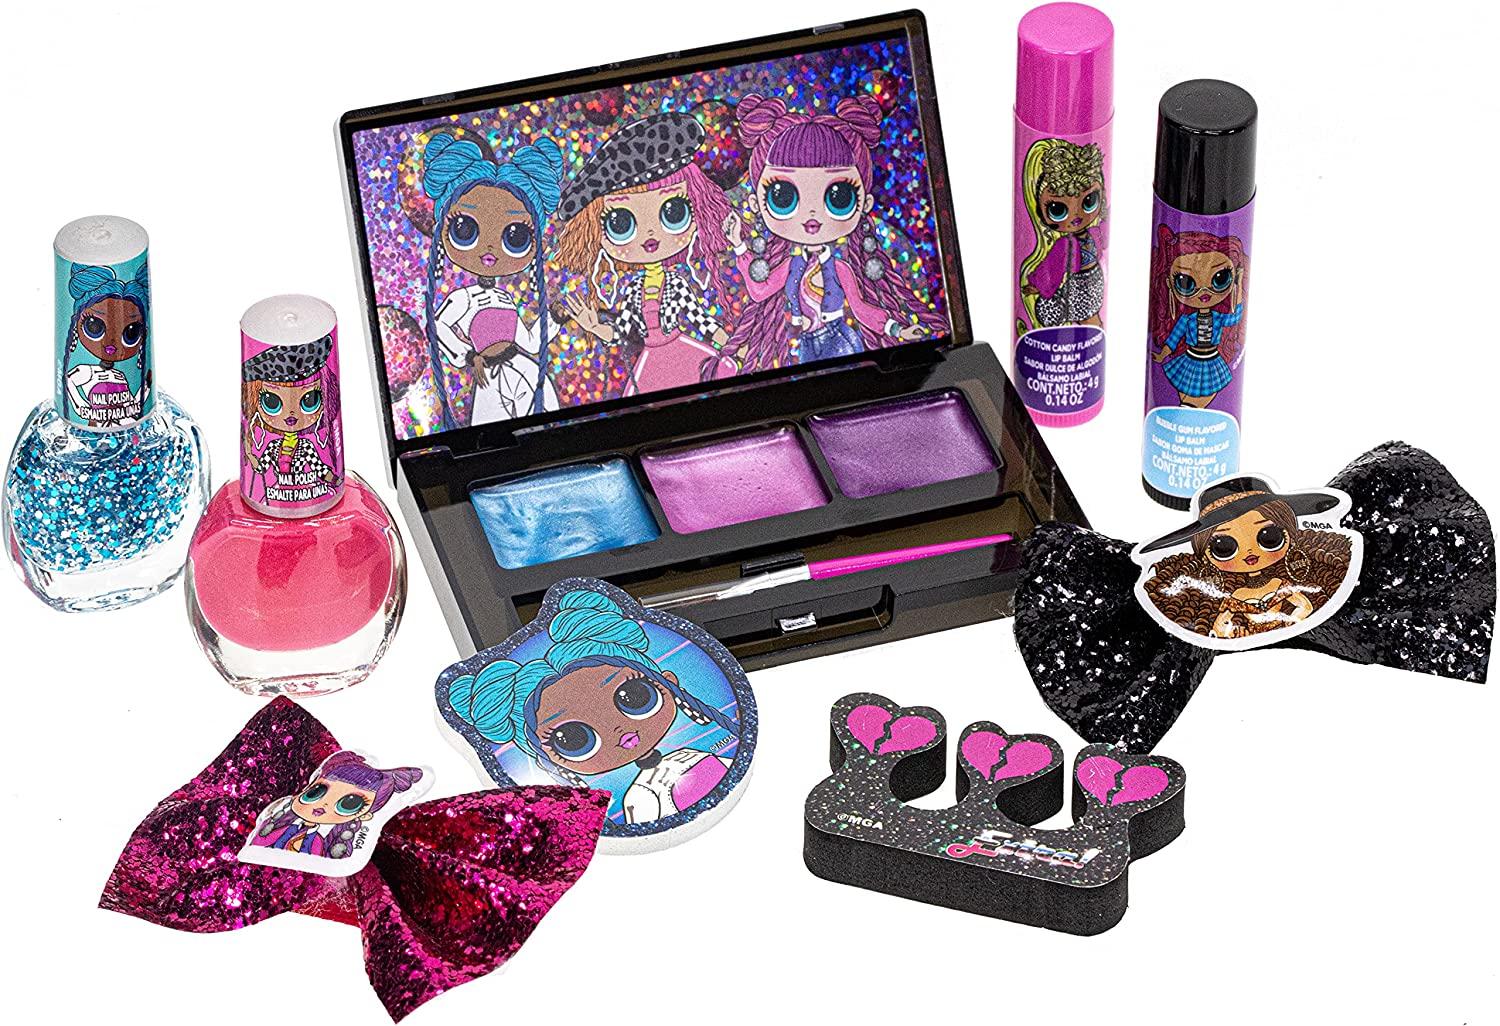 L.O.L Surprise! Townley Girl Backpack Cosmetic Makeup Set with Flip-up  Mirror includes Lip Gloss, Nail Polish, Hair Bow & more for Kid Tweens Girls,  Ages 3+ perfect for Parties, Sleepovers & Makeovers